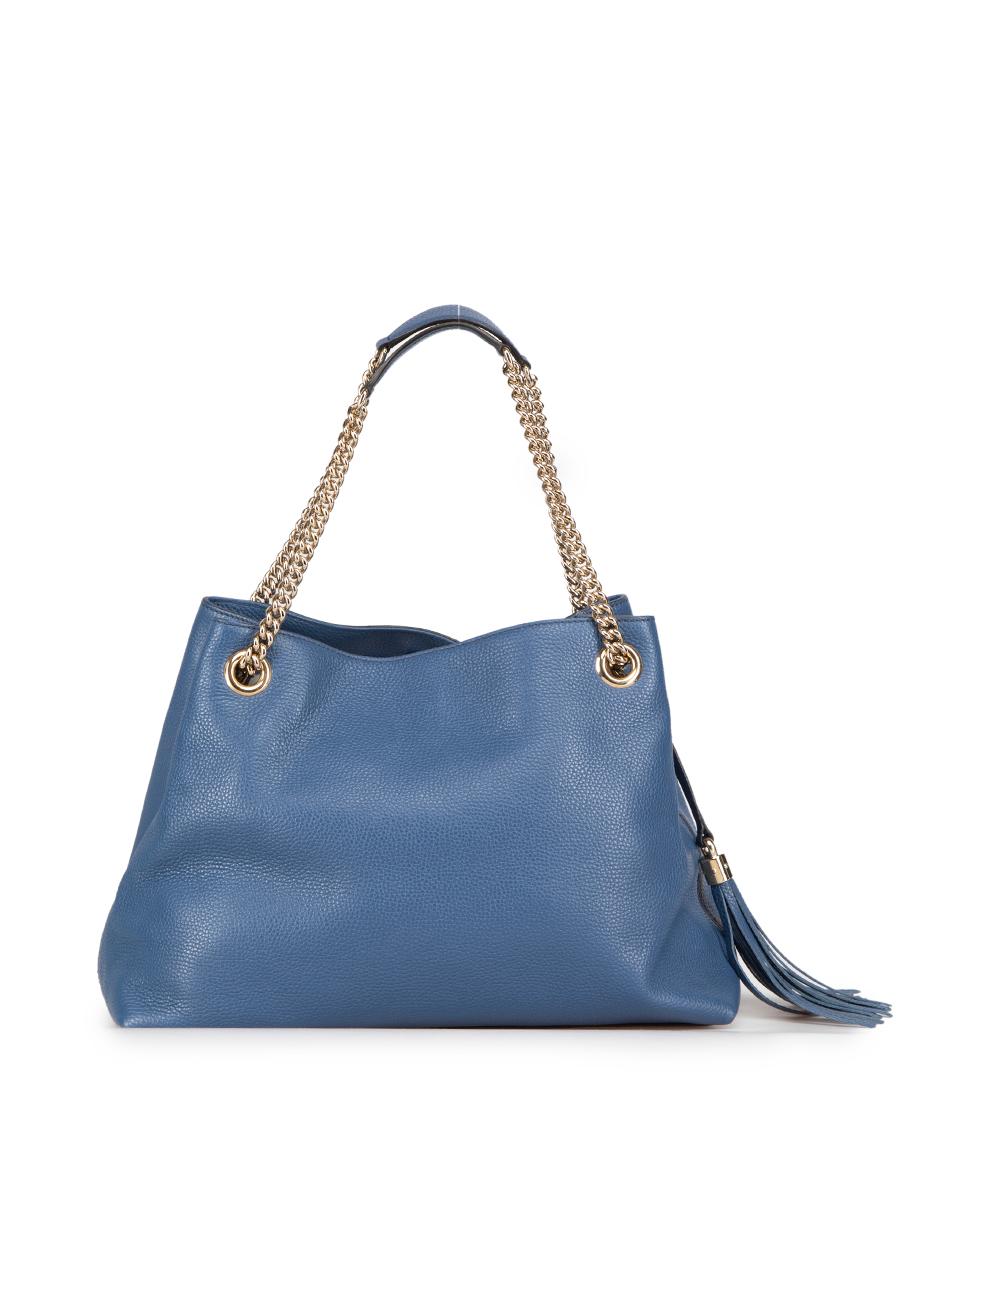 Gucci Blue Leather Medium Soho Tote Bag In Excellent Condition In London, GB